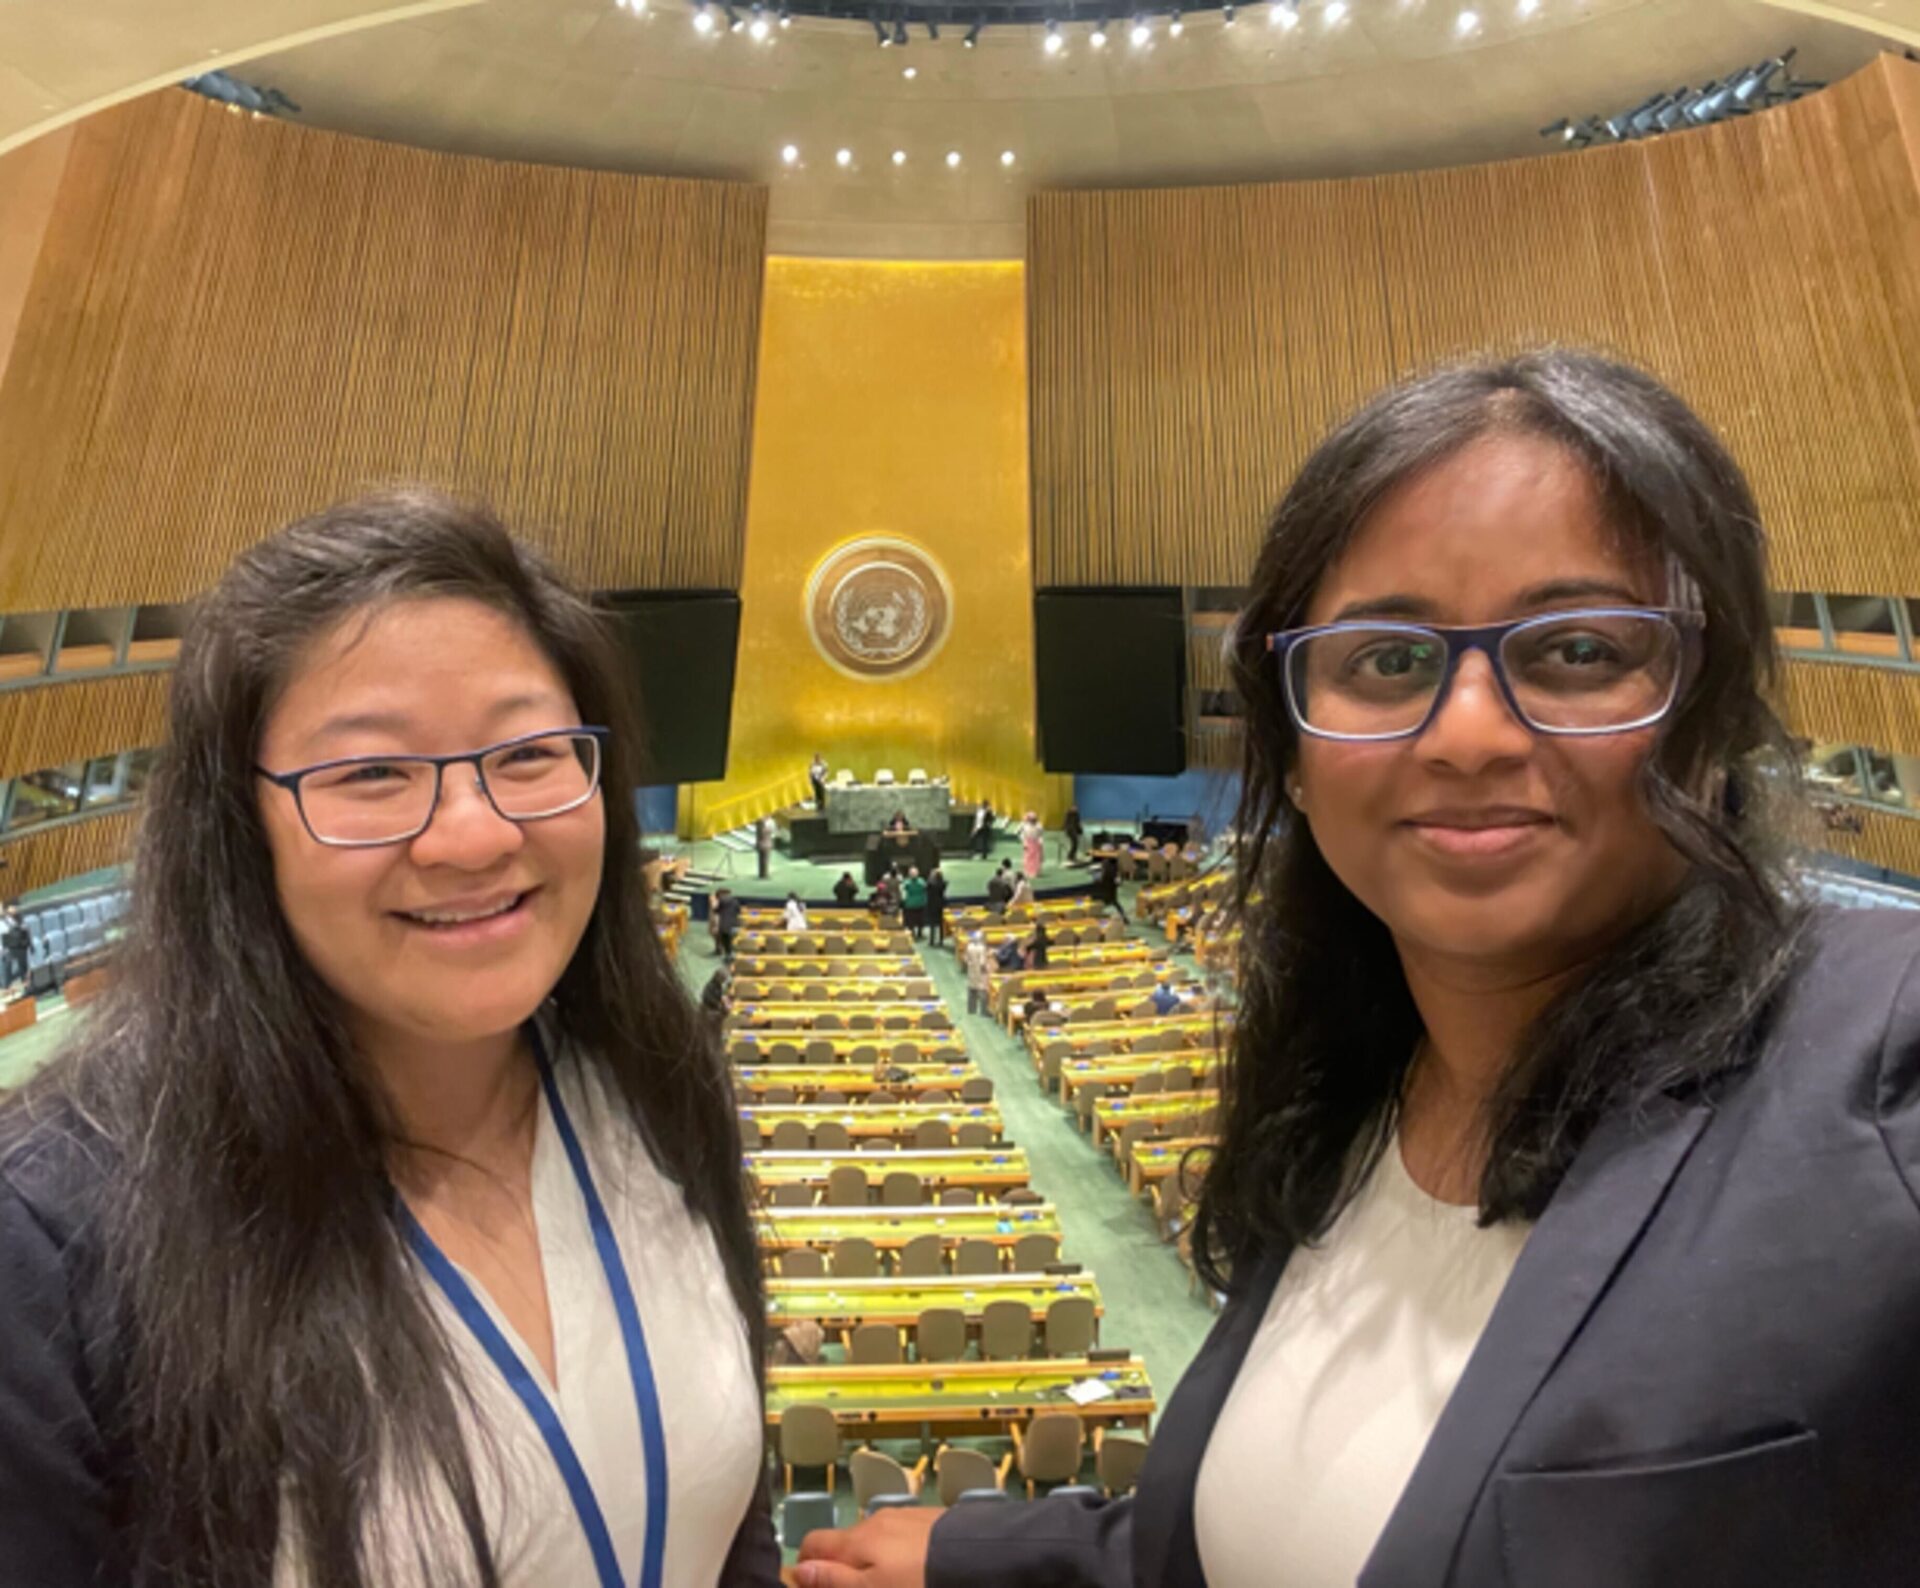 Dr. Poh Tan and Dr. Melanie Ratnam at the United Nations Headquarters in New York City for CSW67 (1)